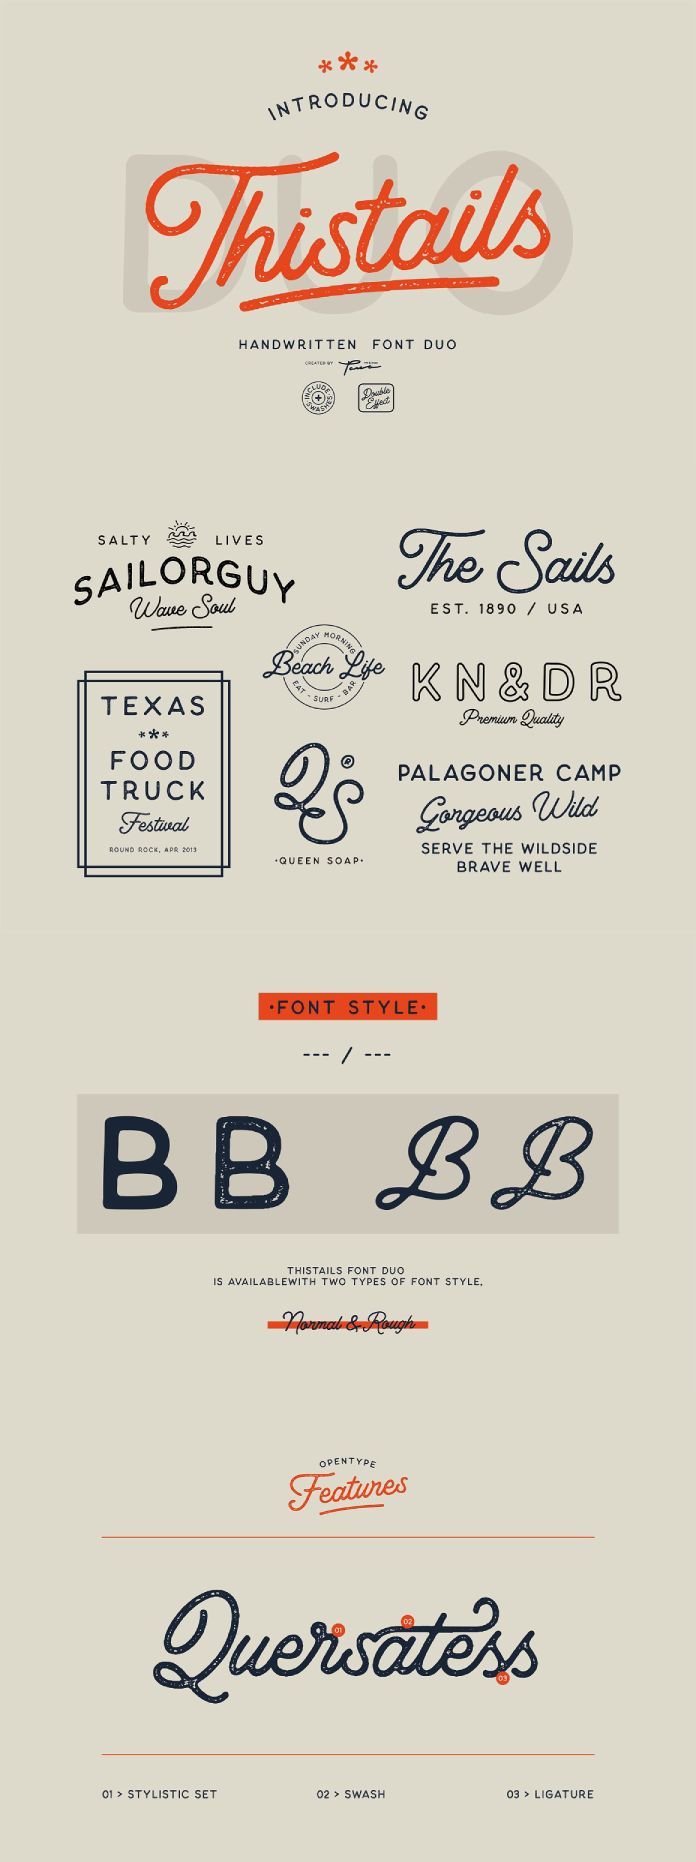 Thistails Font Duo by Pana Type & Studio